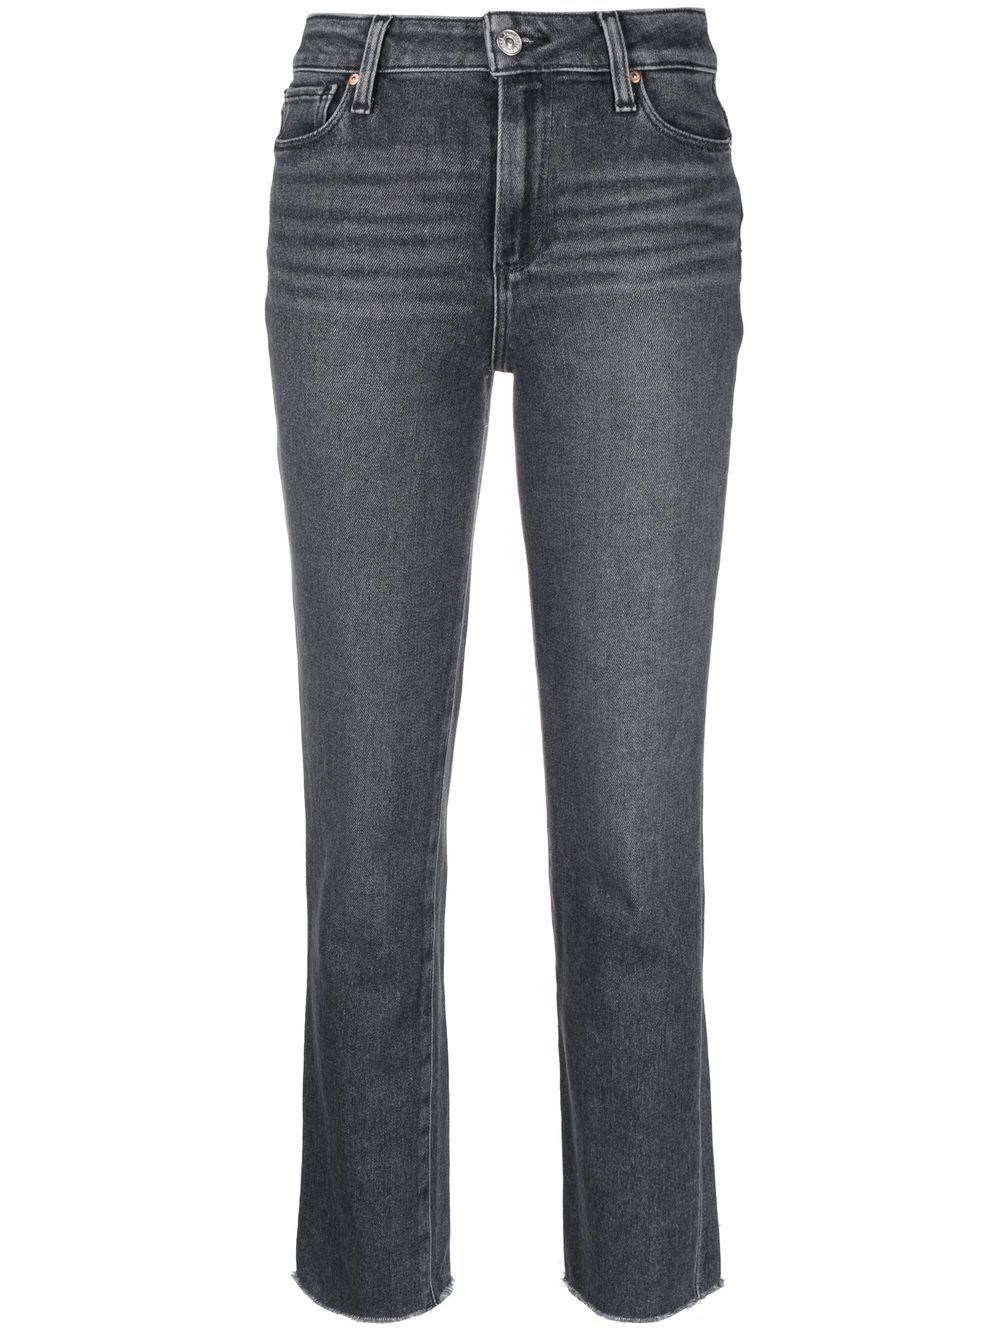 PAIGE SKINNY CUT CROPPED JEANS